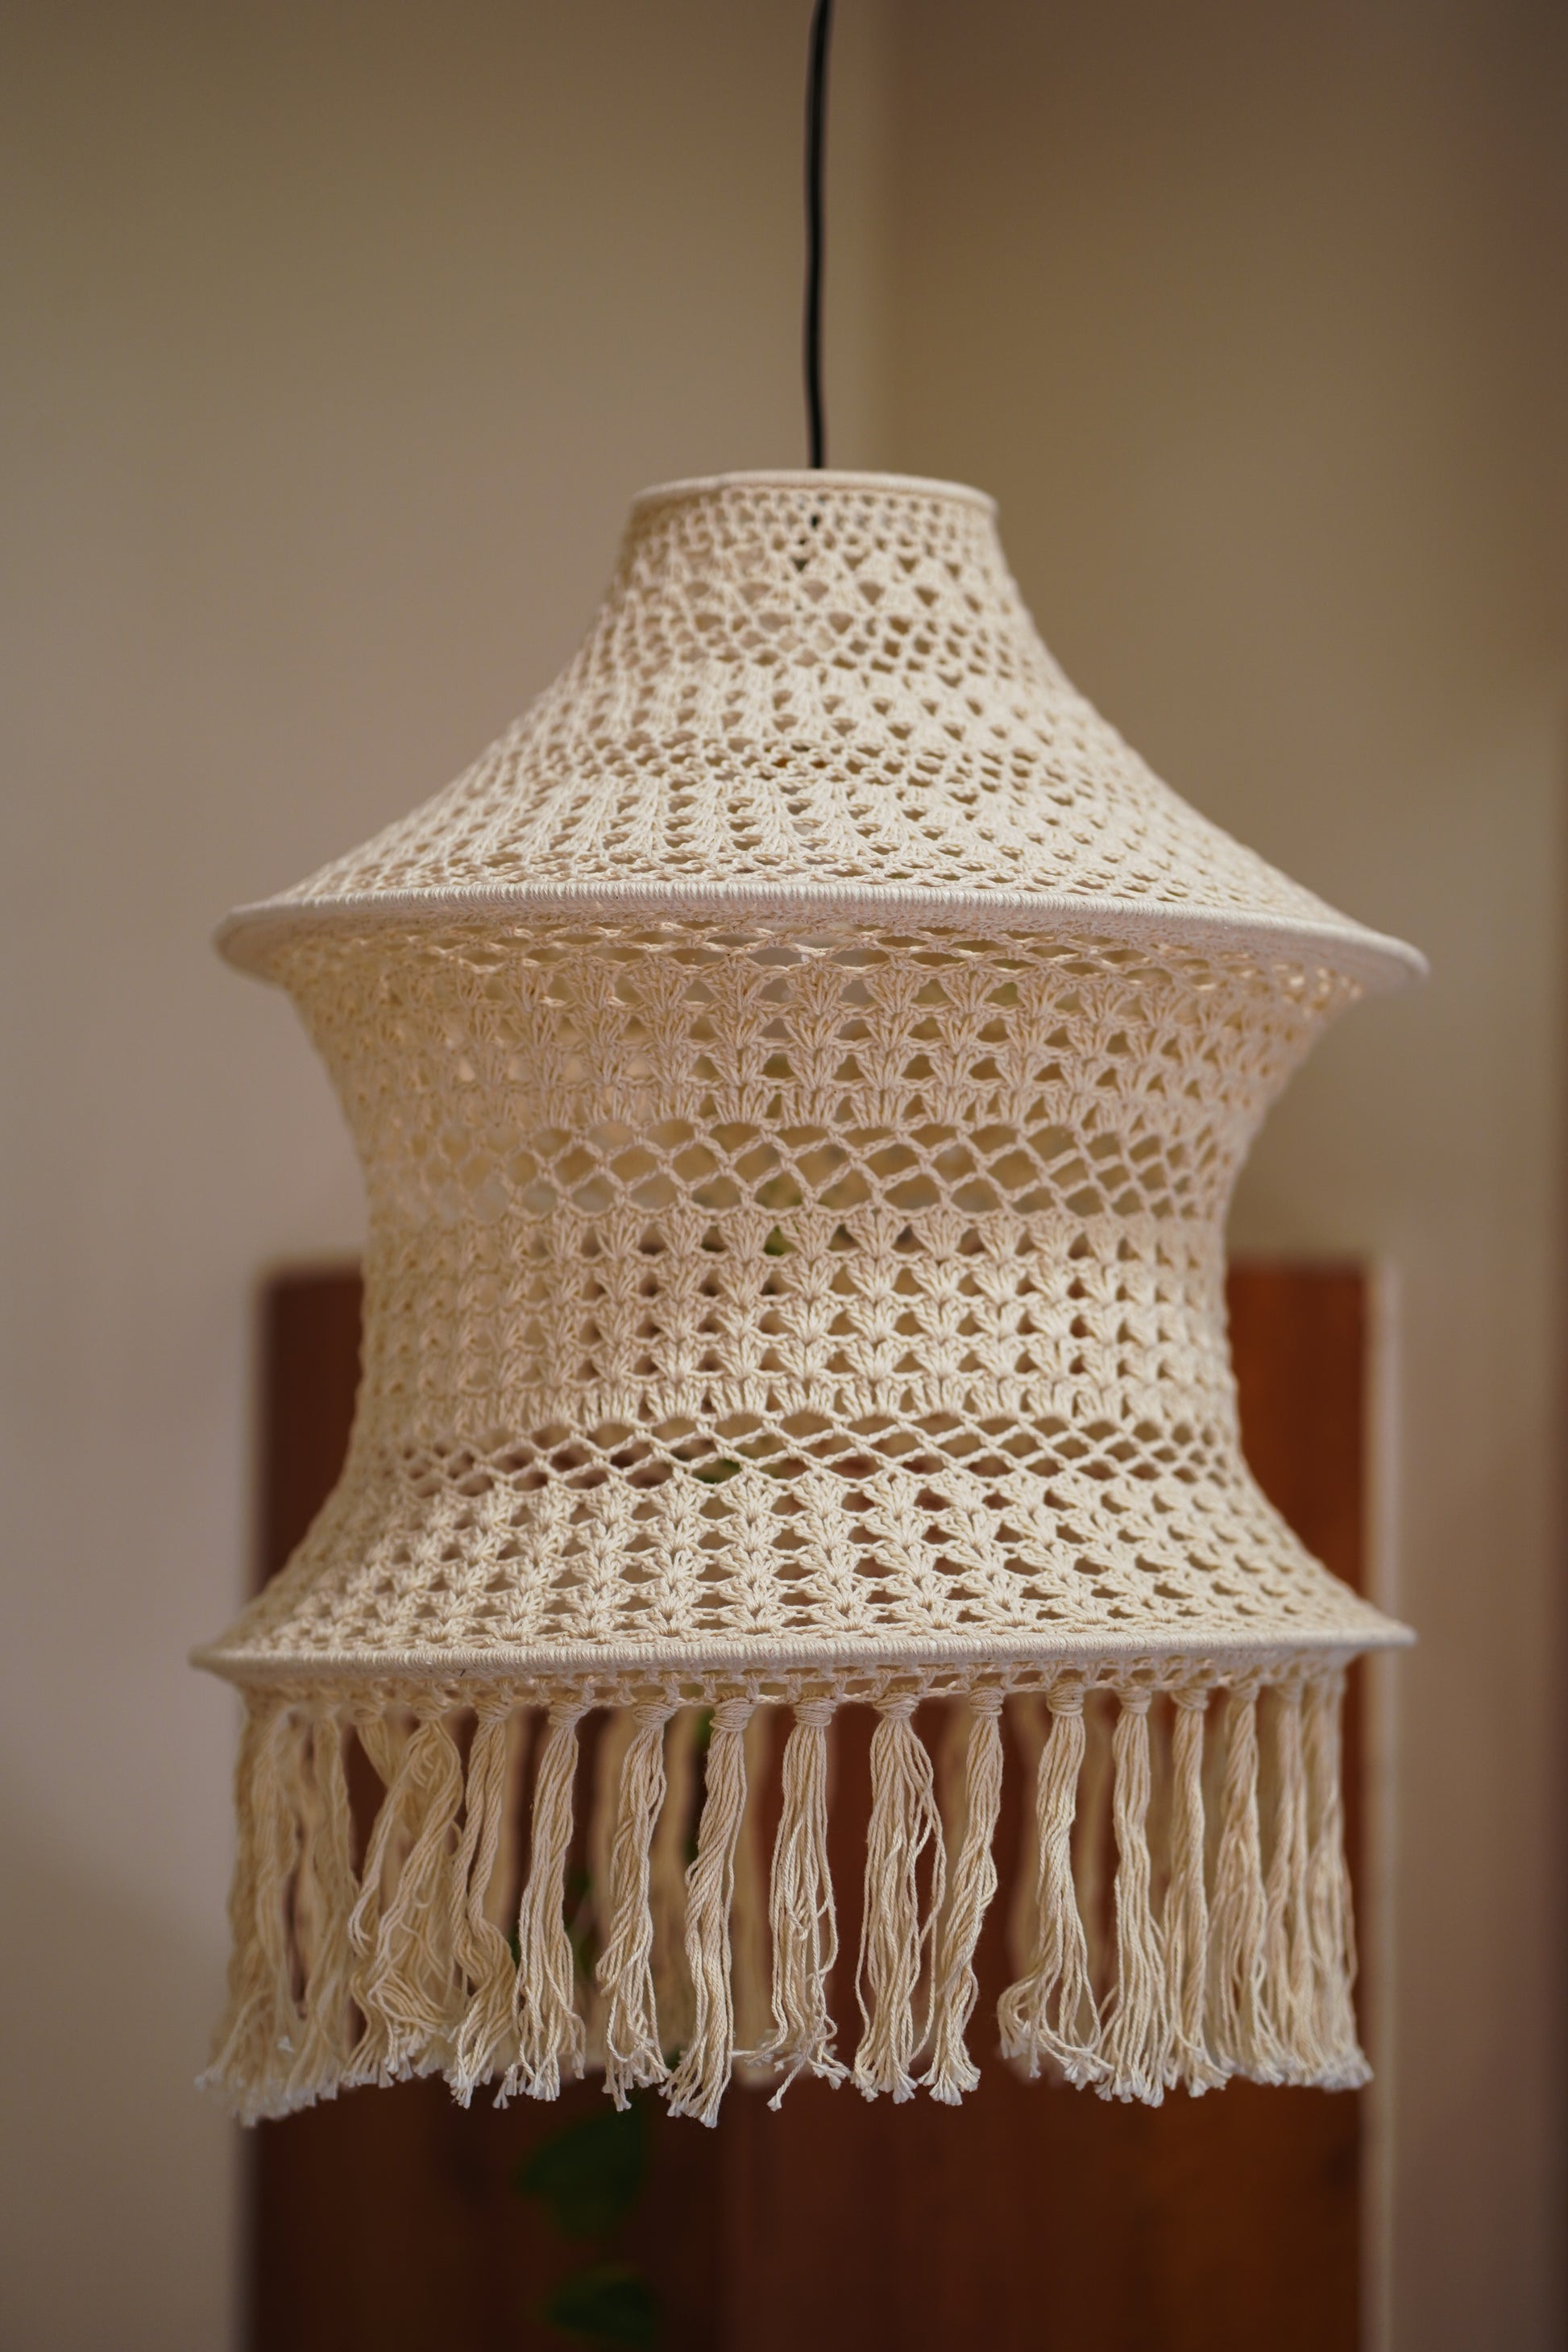 Tesu lamp made with detailed handwork of crochet by our skilled artisans. It can be styled in any corner of your house and will look gorgeous.&nbsp; Best used with warm white light to bring the peaceful bohemian vibe to your space.&nbsp; We love using these lamps over our dining table for celebratory dinners and on the bedside corners.